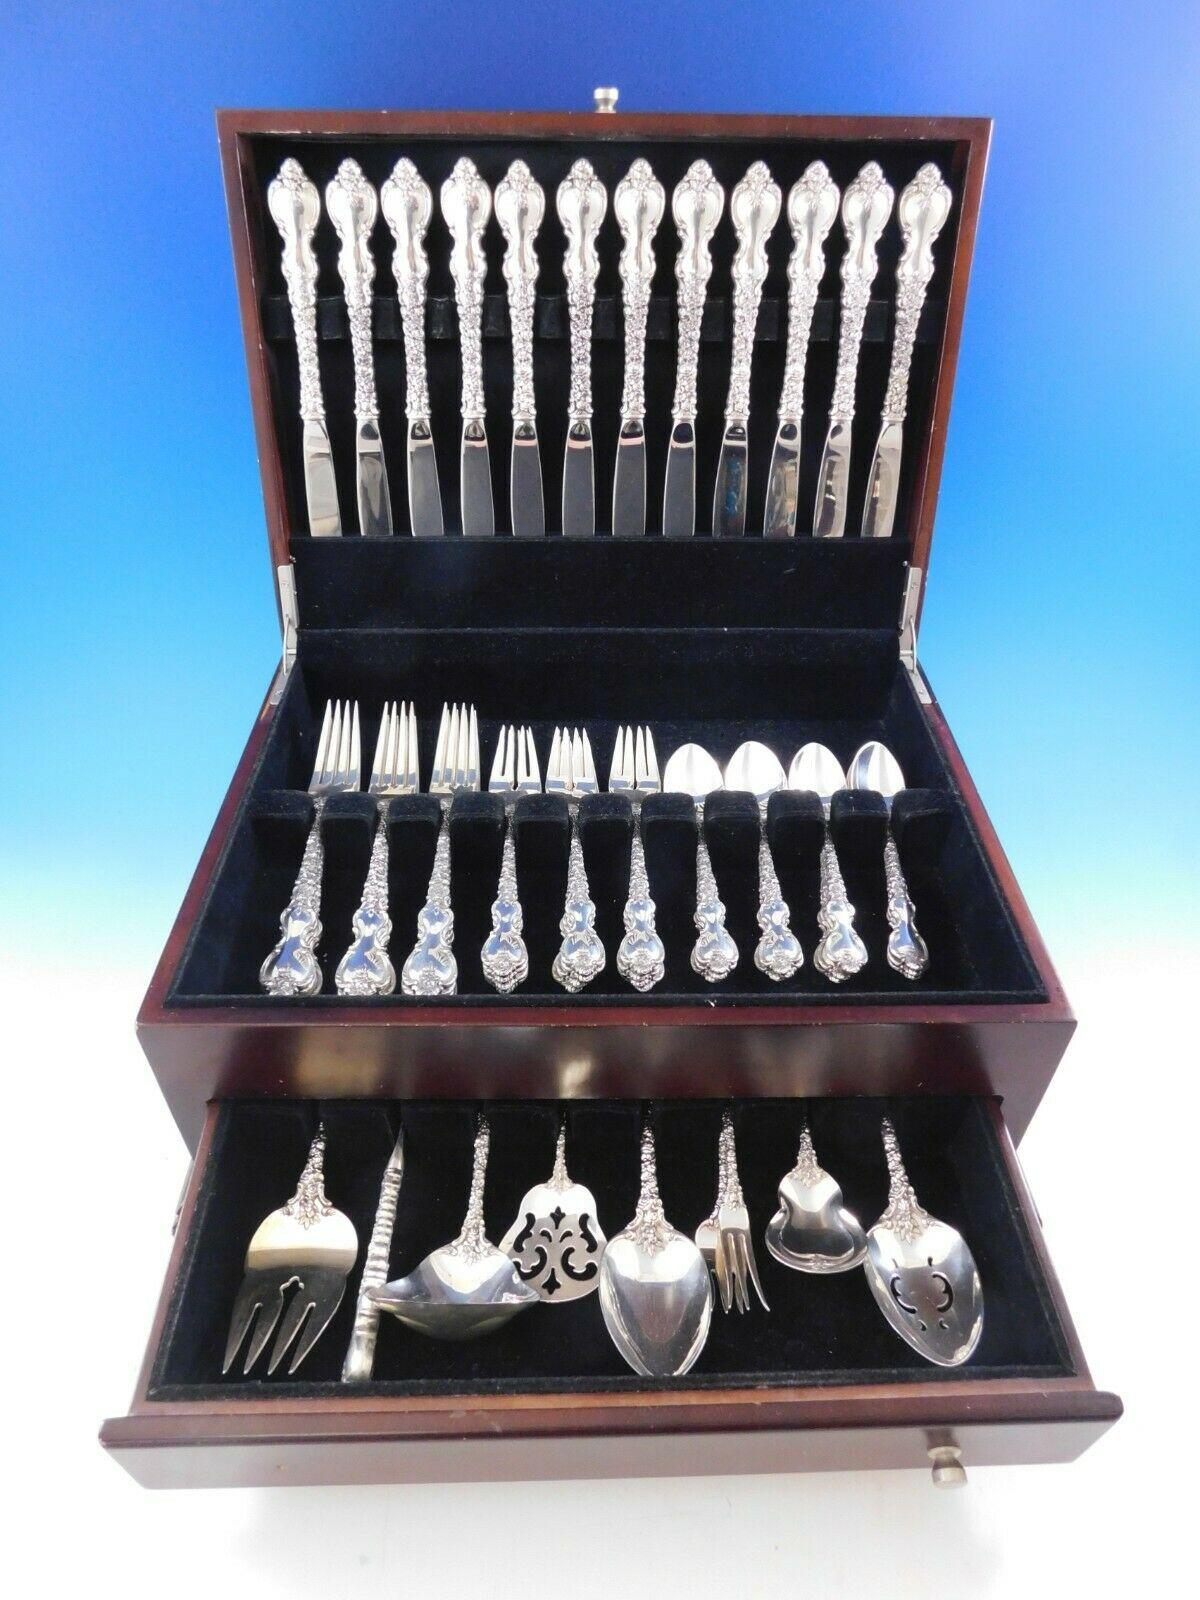 Gorgeous dinner size Du Barry by International sterling silver flatware set, 57 pieces. This set includes:

12 dinner knives, 9 3/4